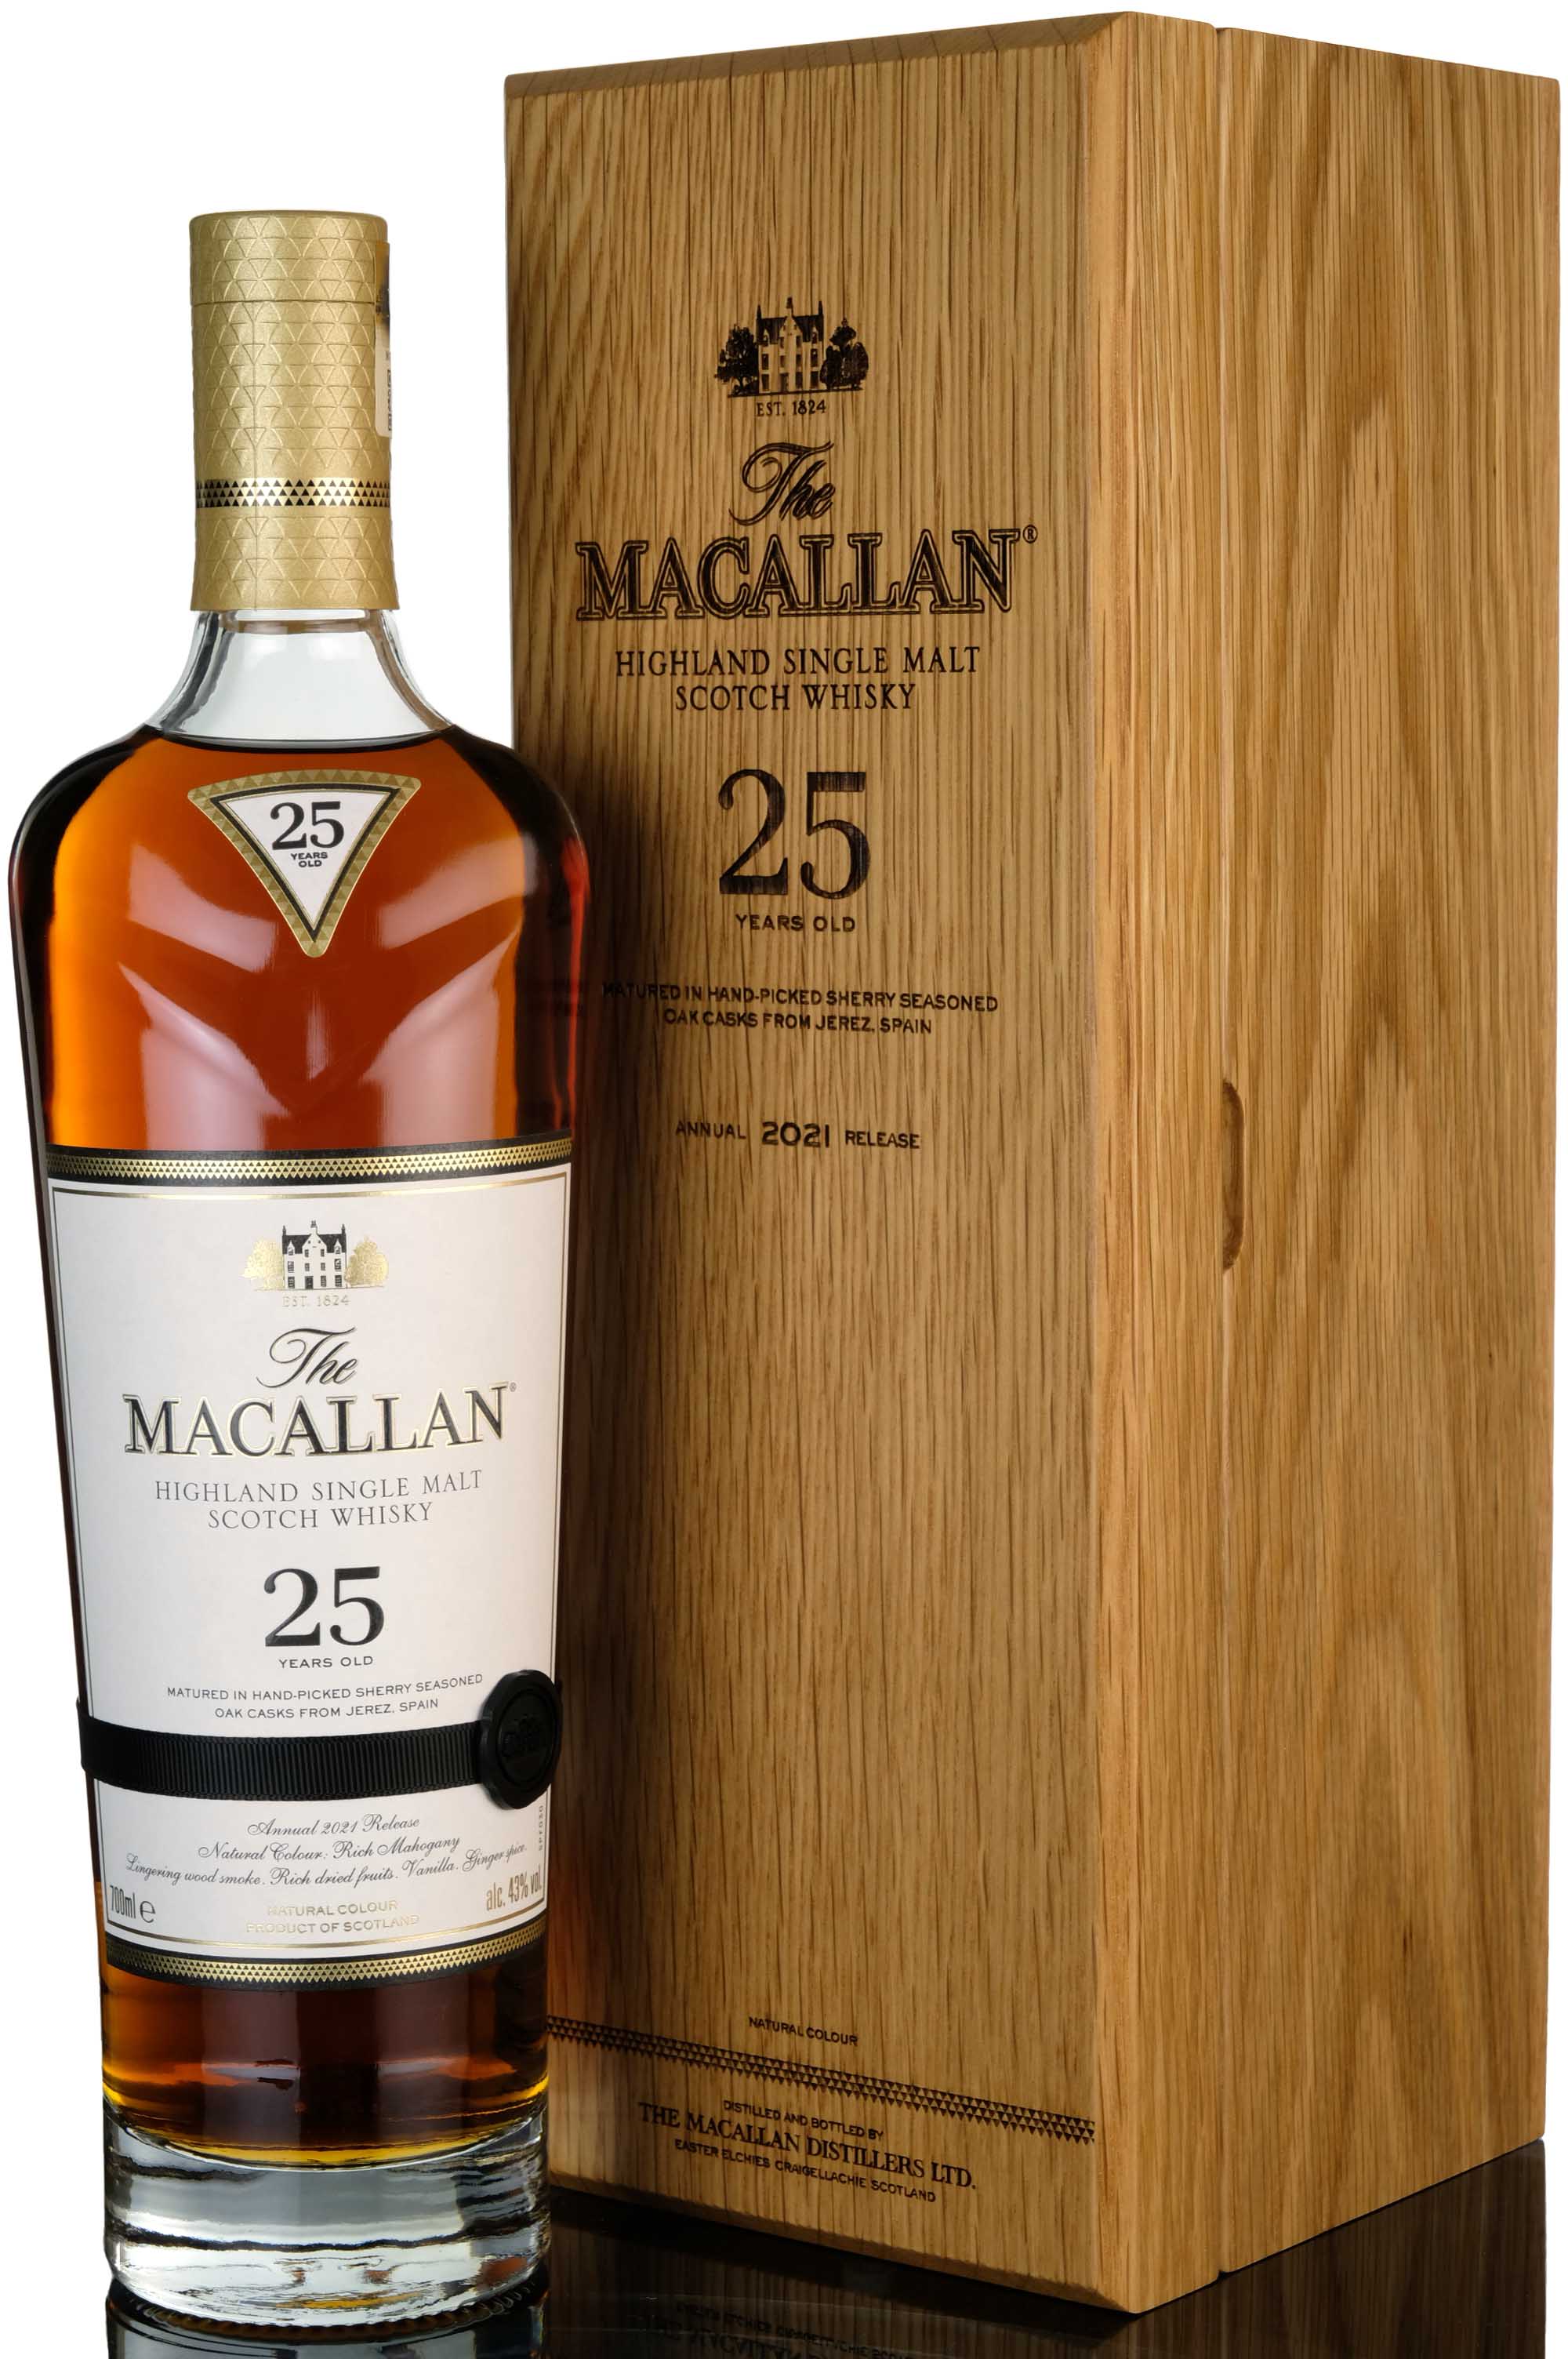 Macallan 25 Year Old - Sherry Cask - 2021 Release